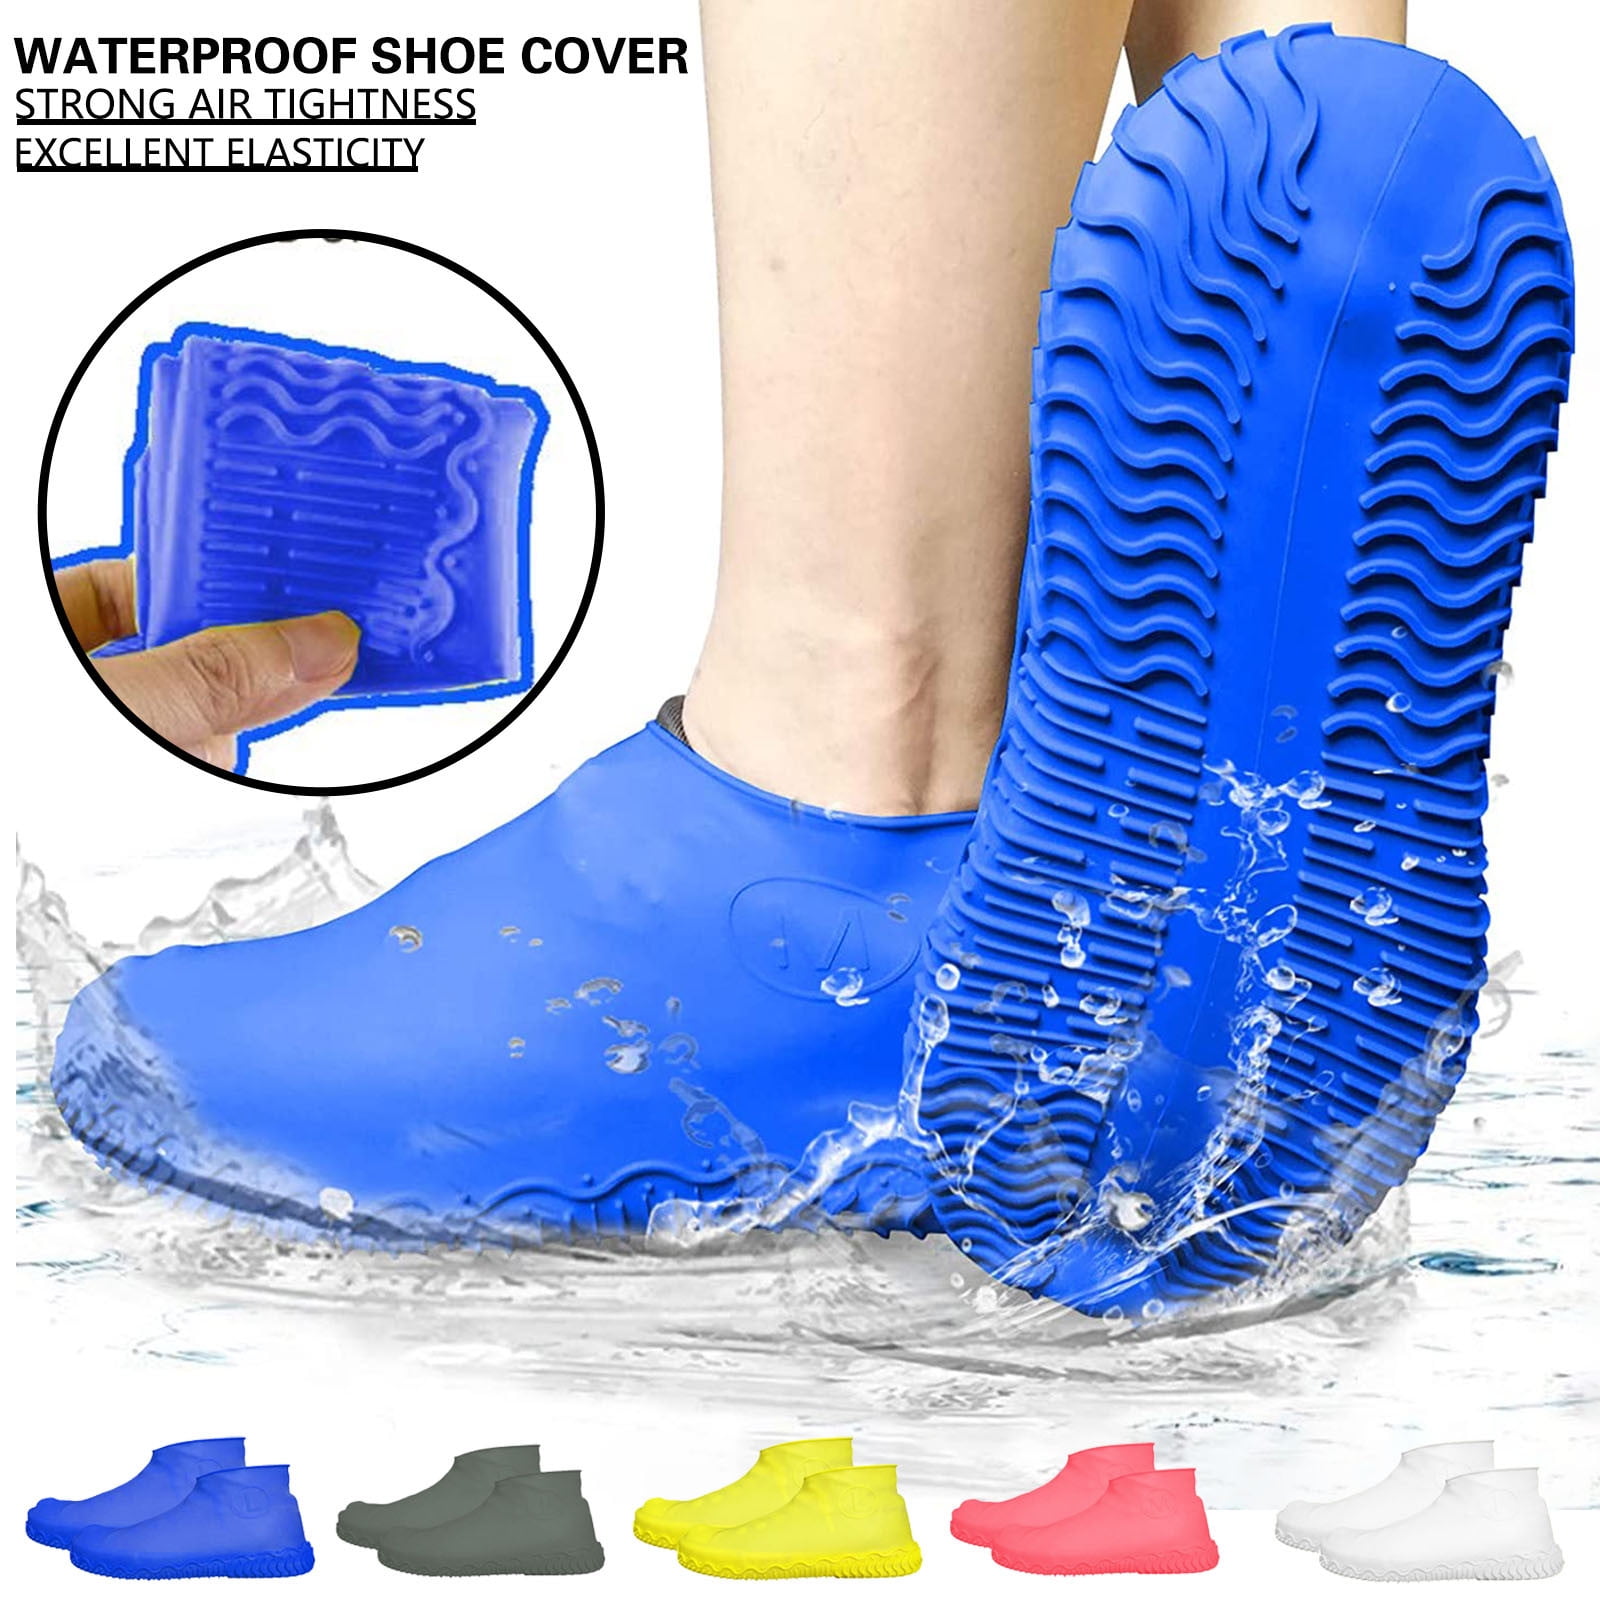 Silicone Shoes Covers Waterproof non-slip Rain Boot/Shoes/Overshoes Hot 